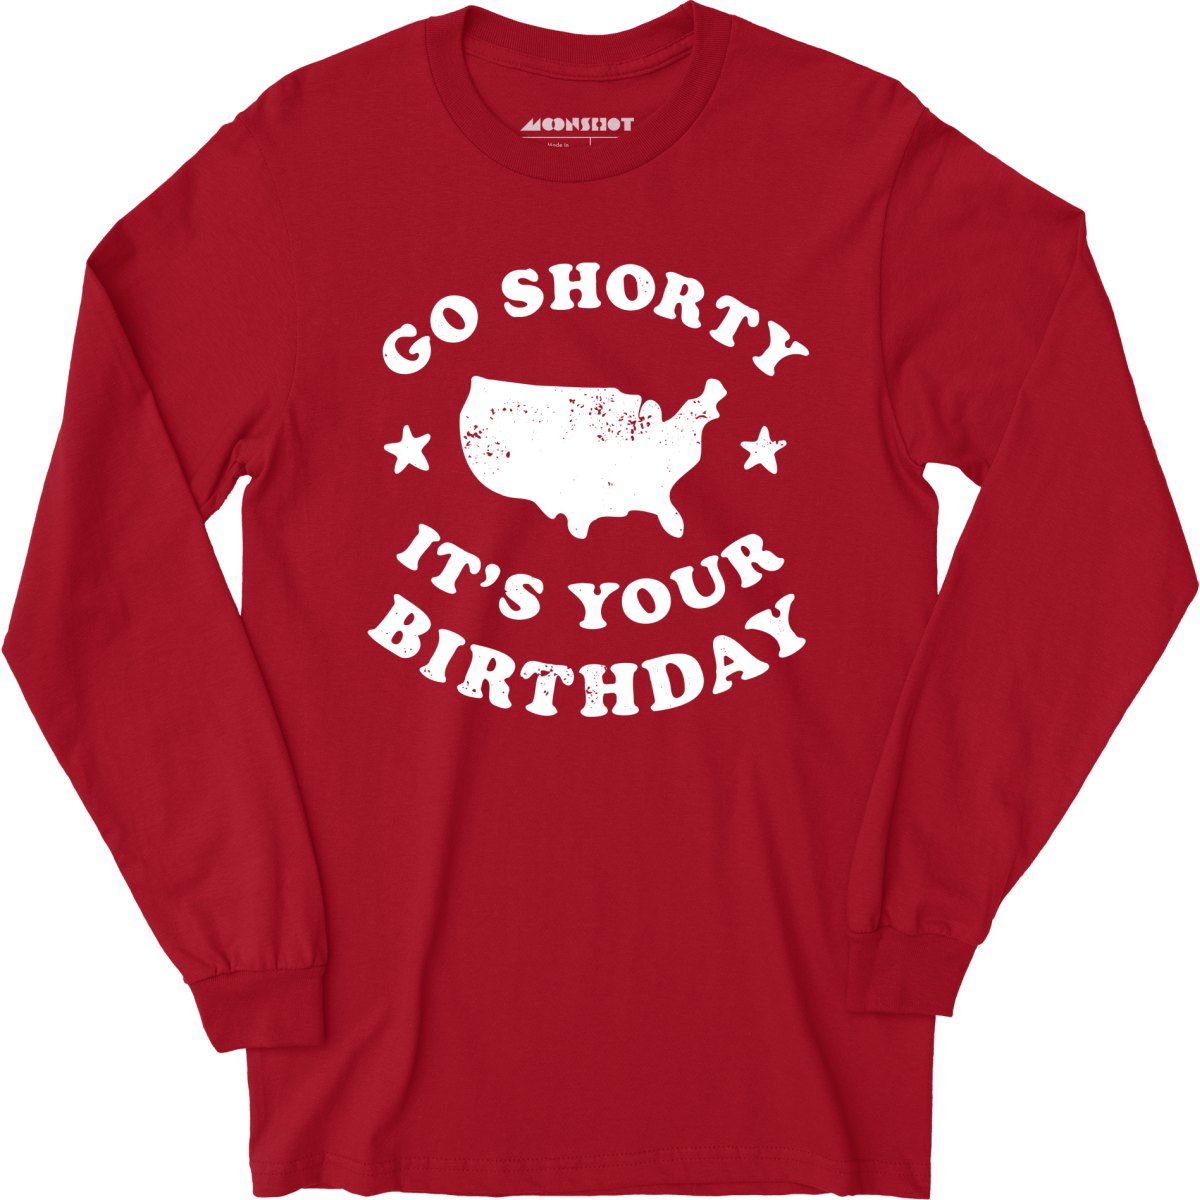 Go Shorty It's Your Birthday - Long Sleeve T-Shirt